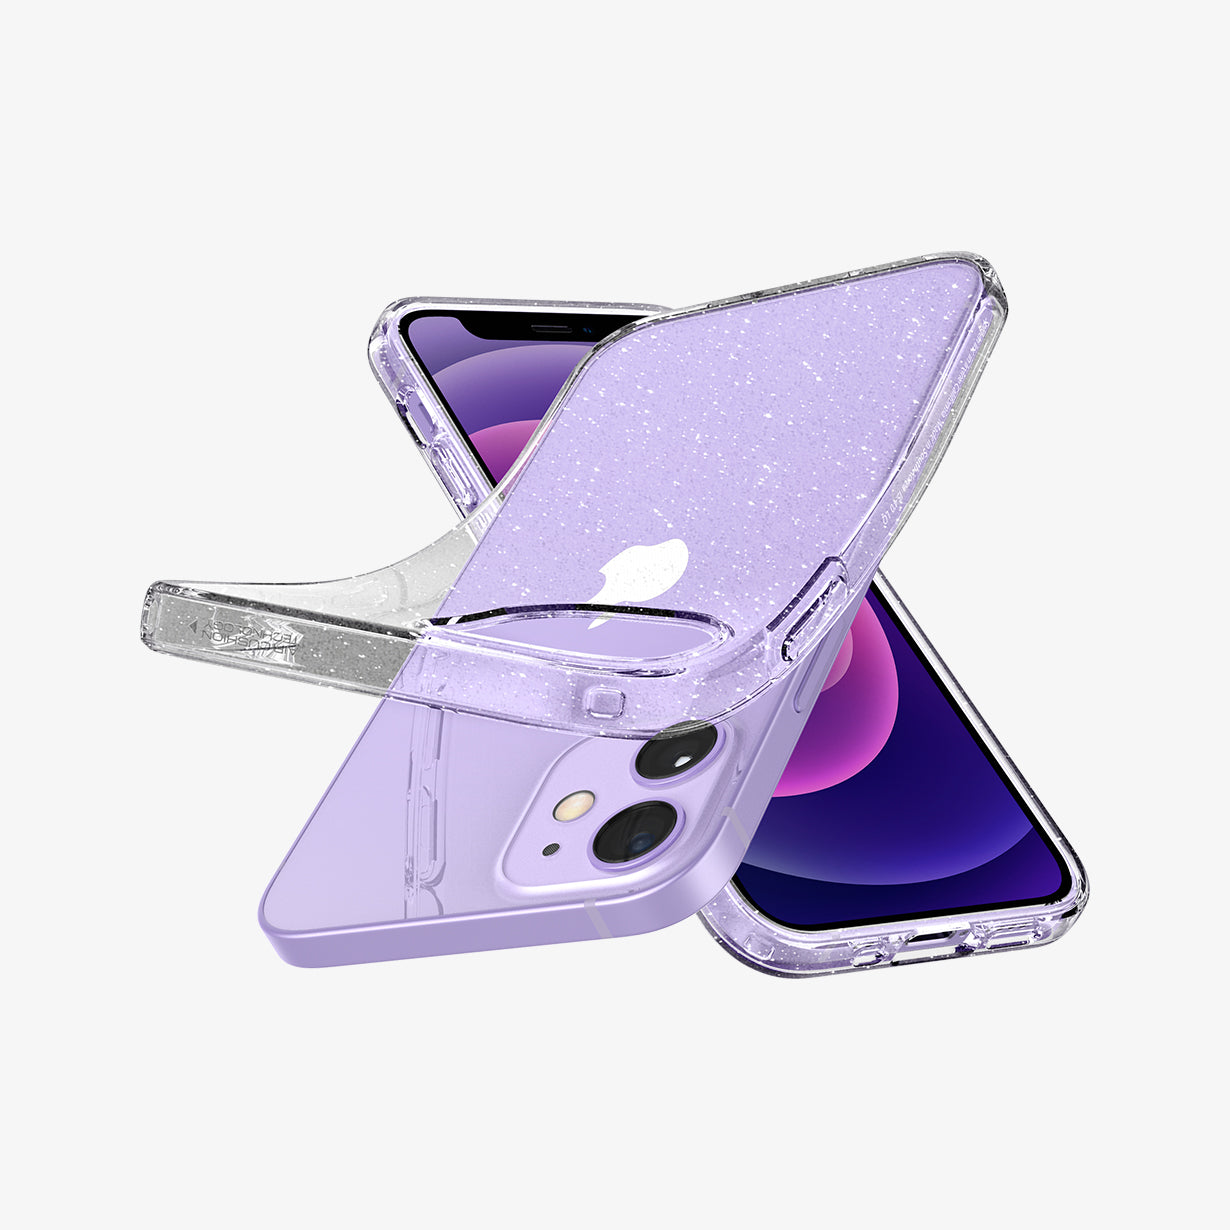 ACS01698 - iPhone 12 Pro / 12 Case Liquid Crystal Glitter in crystal quartz showing the back, front and sides with case bending away from device